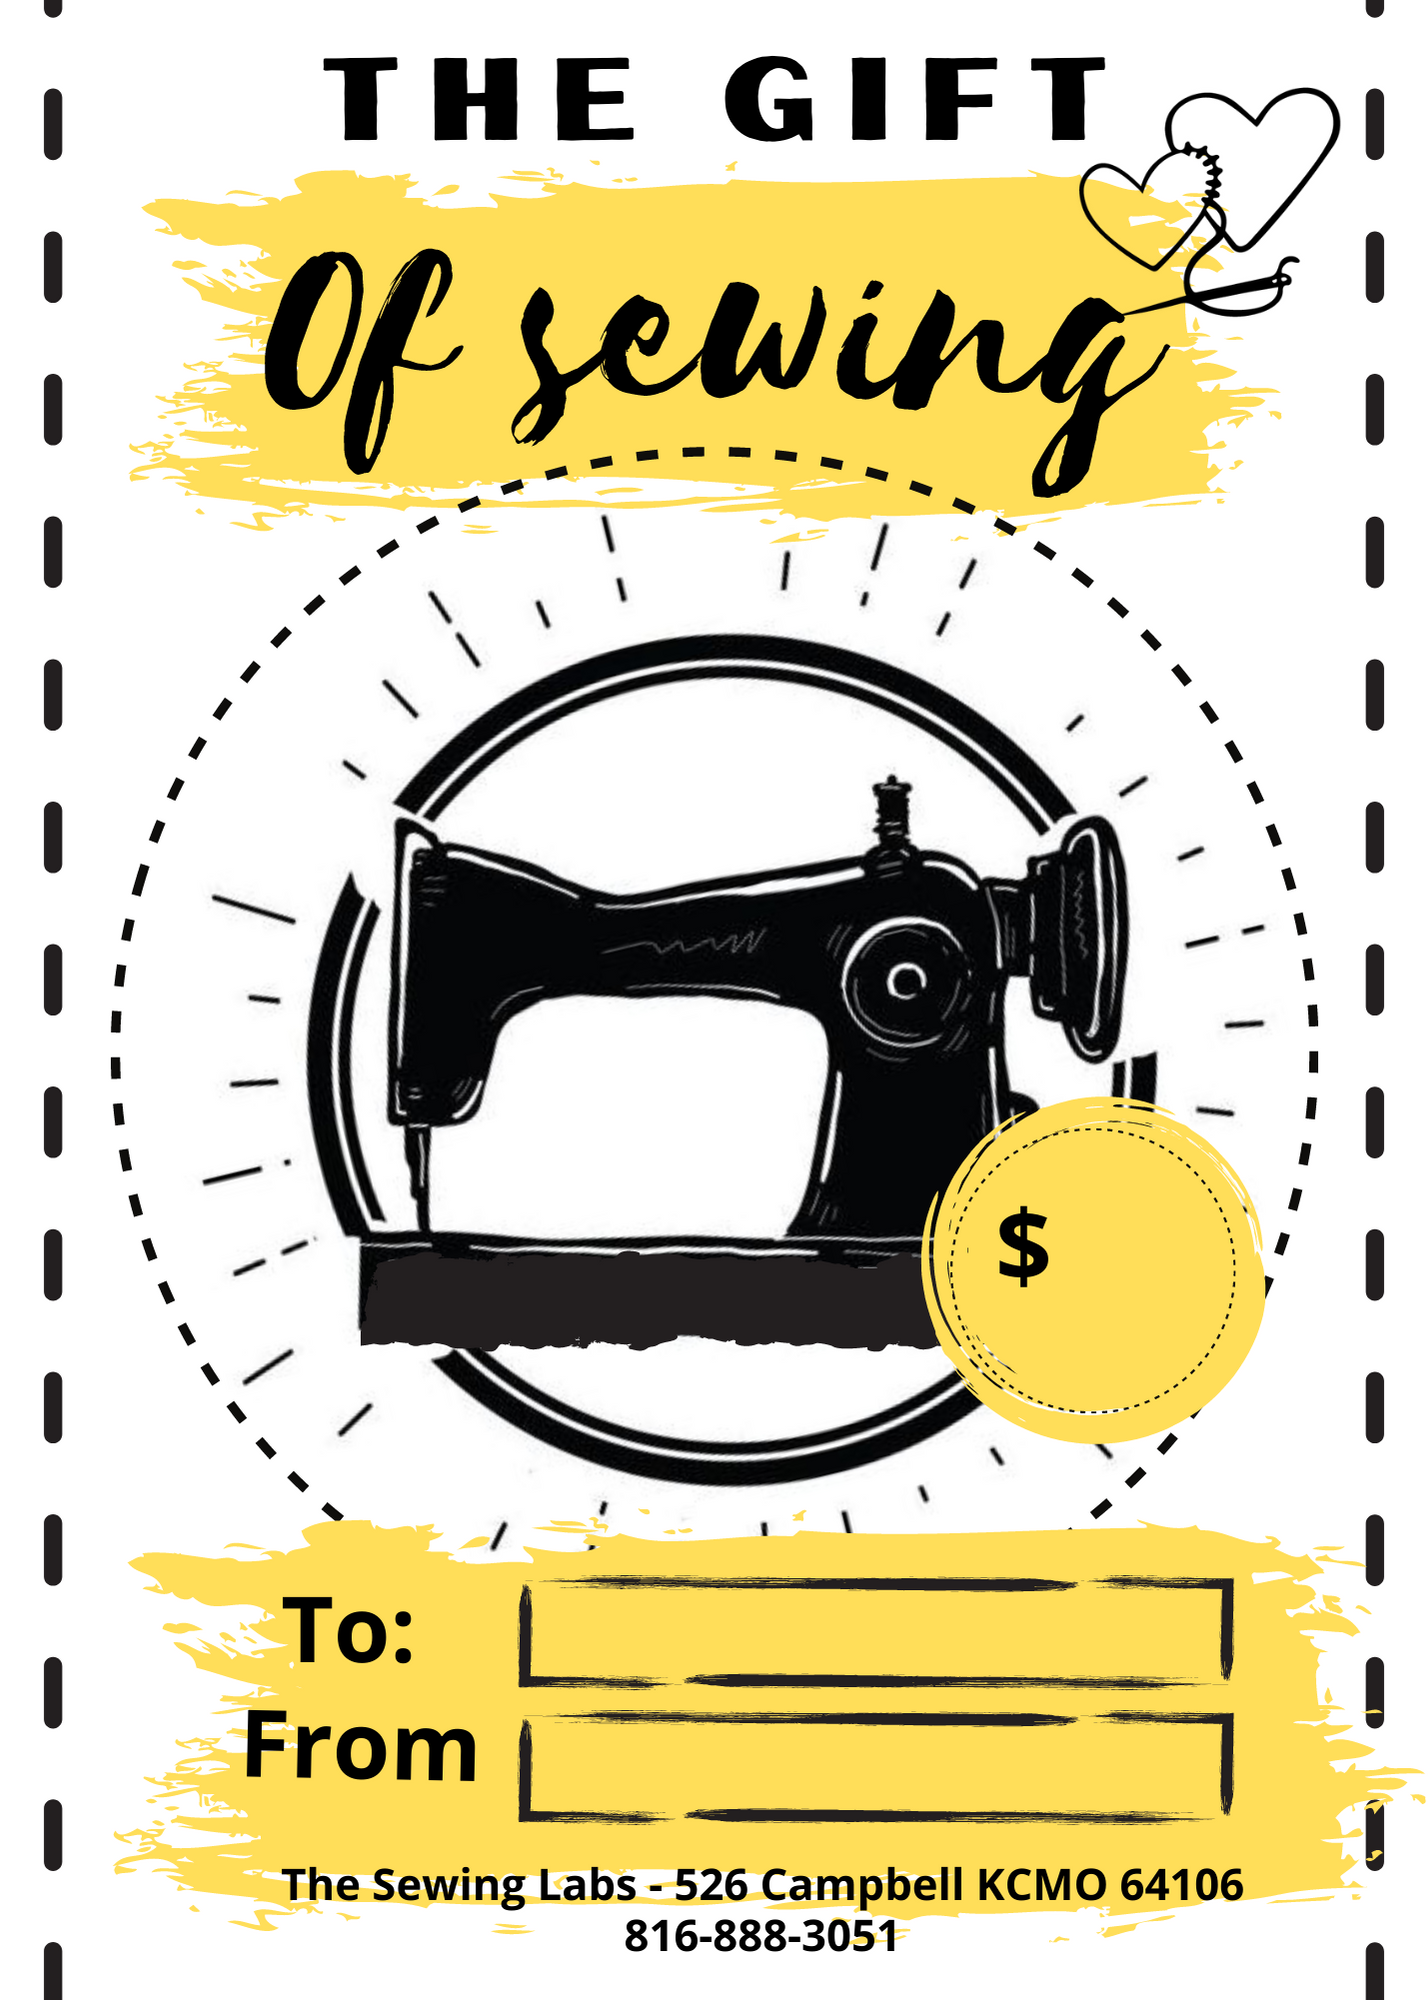 The Gift of Sewing - Gift Certificate - $270